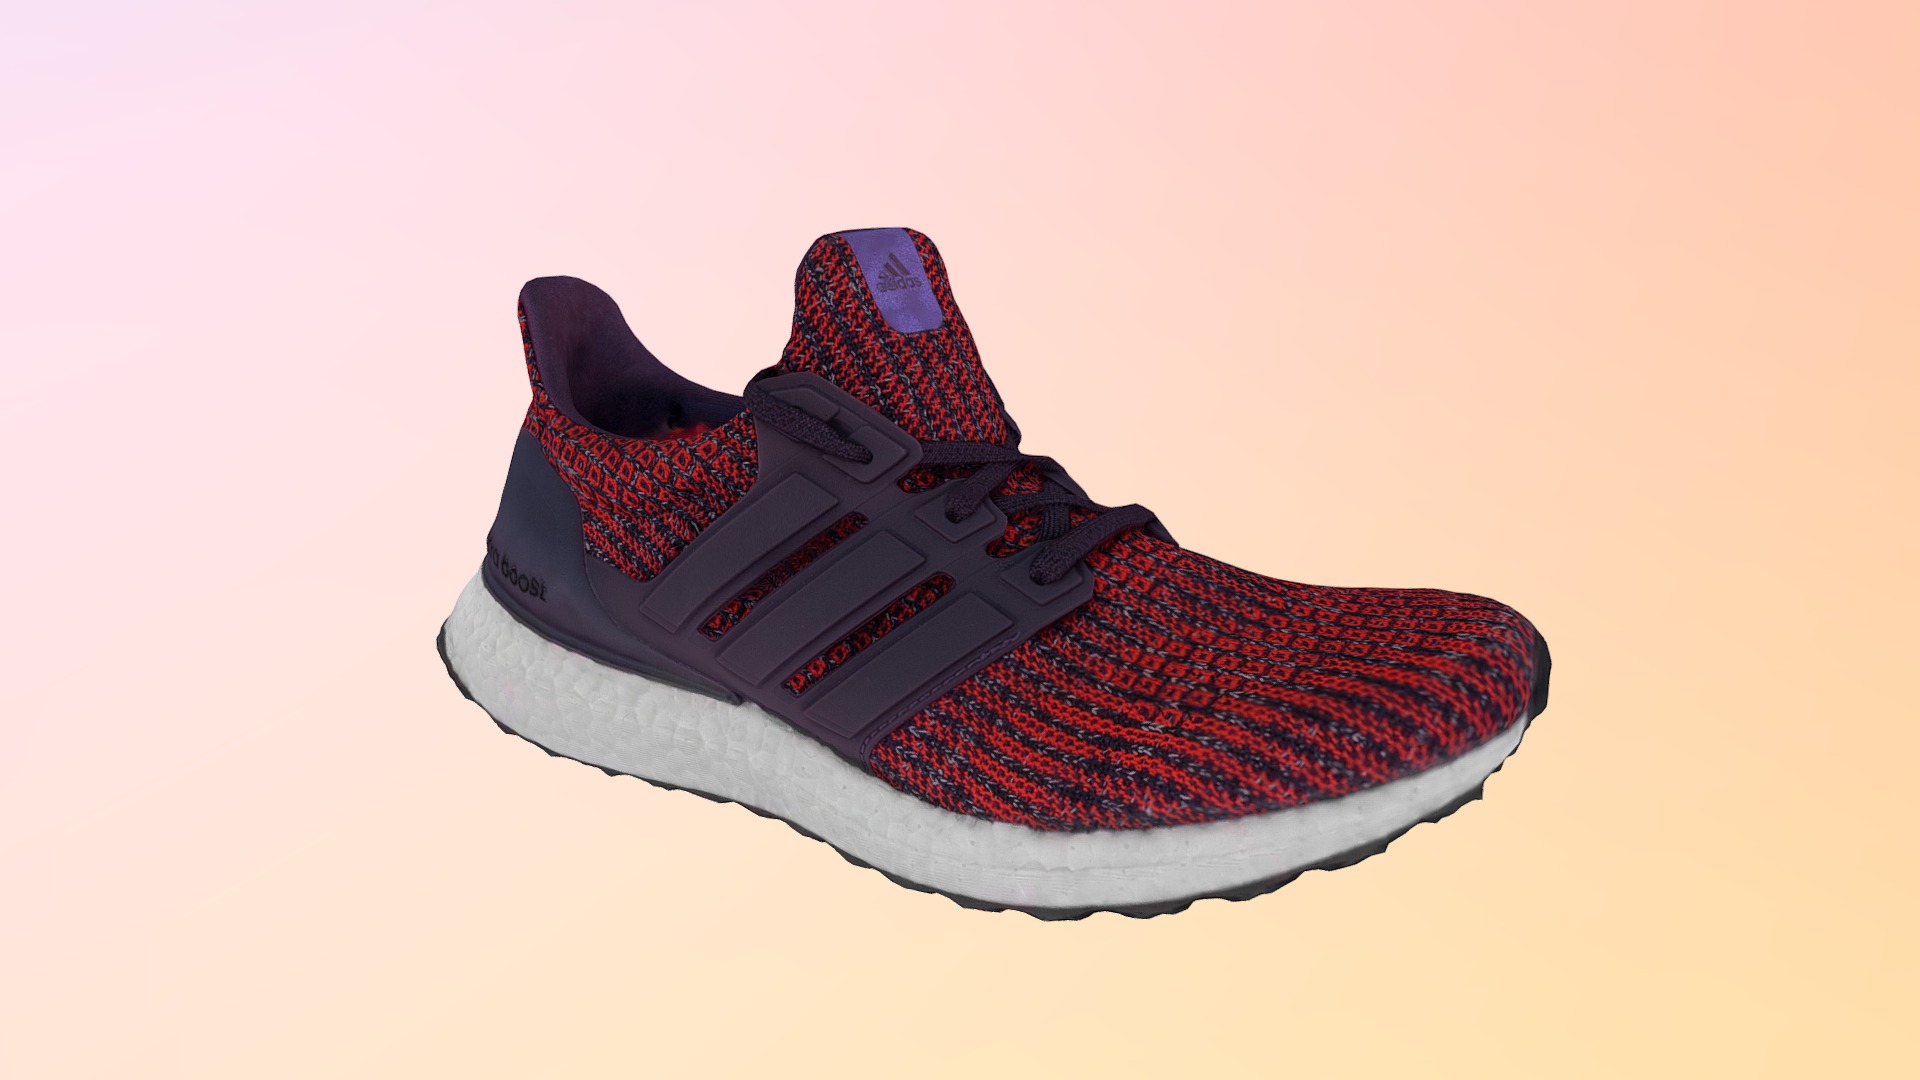 3D model Adidas Ultra Boost Sneaker Red Sneakers Shoes - This is a 3D model of the Adidas Ultra Boost Sneaker Red Sneakers Shoes. The 3D model is about a shoe with a red and blue sole.